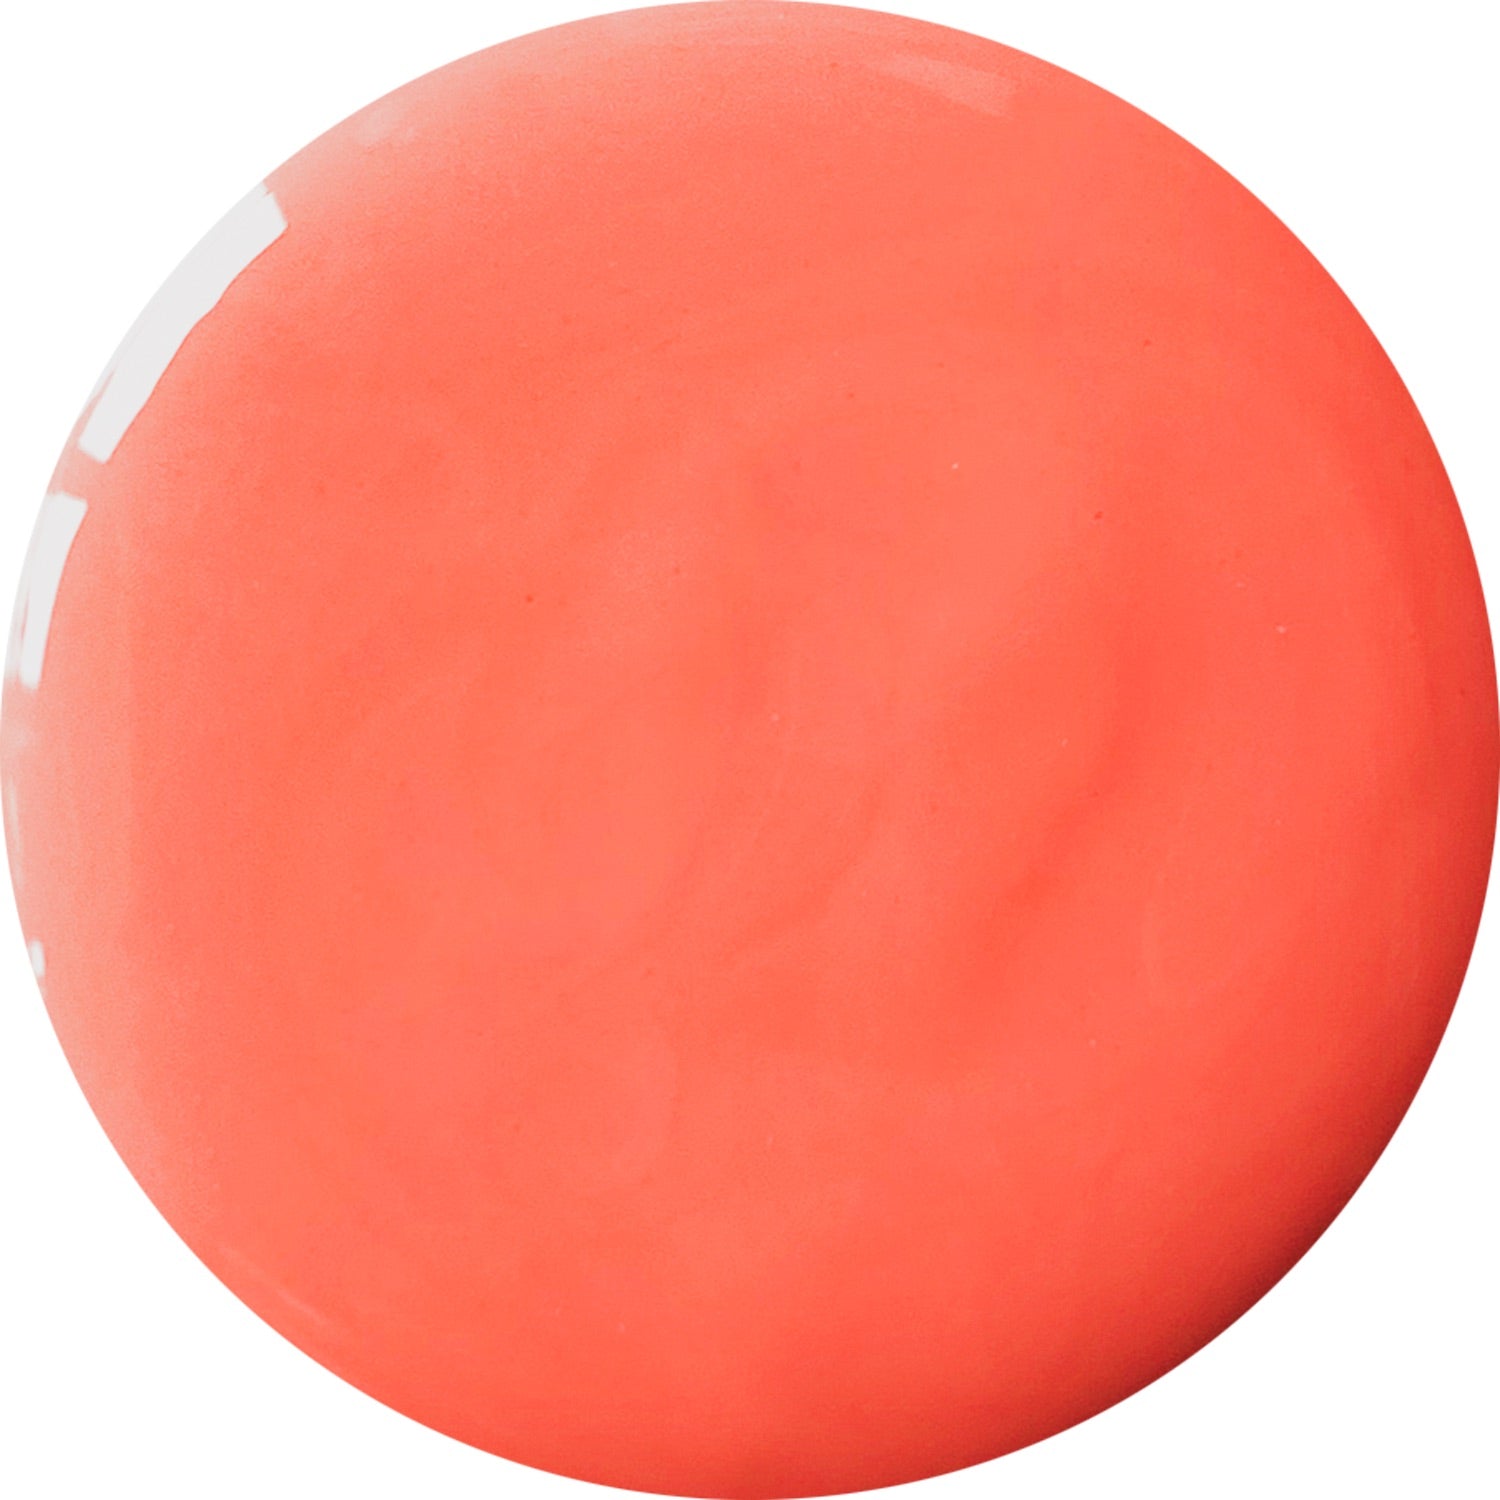 closeup paint swatch of Coral Reefer nail polish